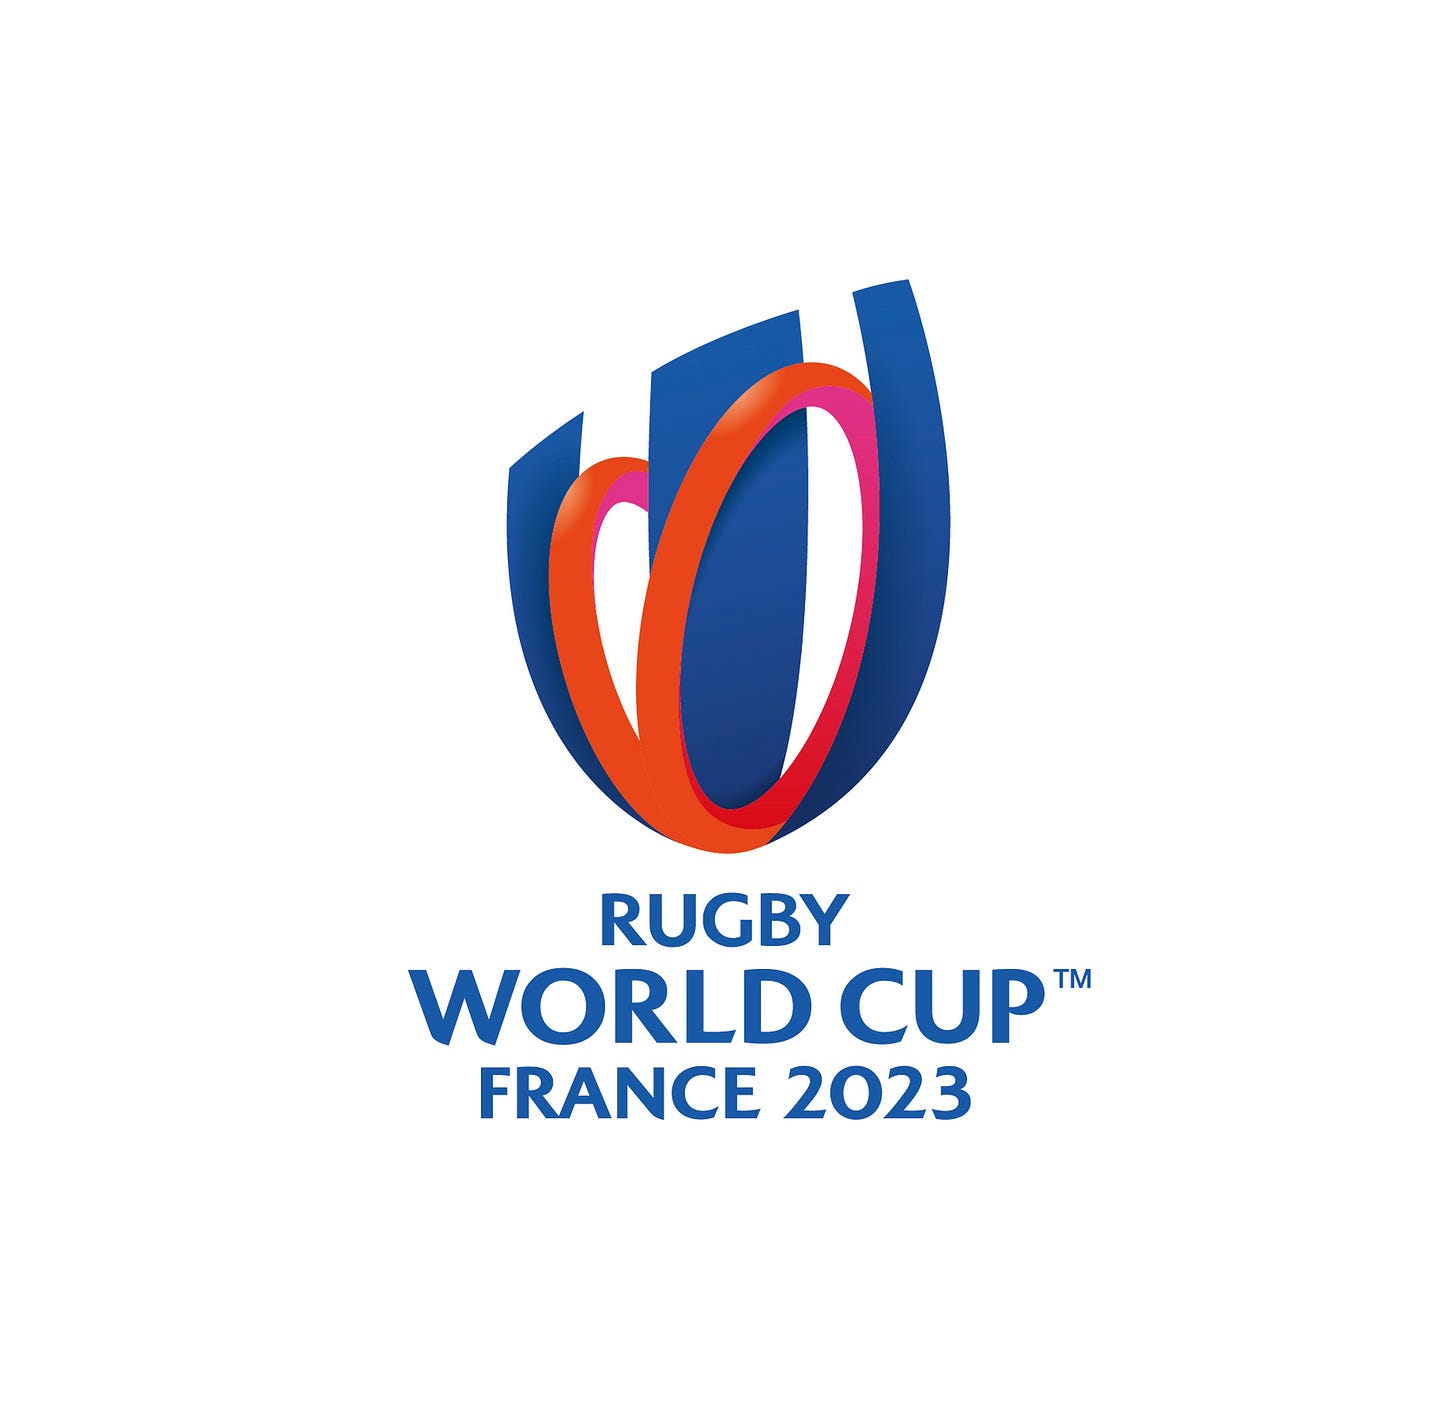 Striking new logo and brand identity launched for Rugby World Cup 2023 ｜ Rugby  World Cup 2023